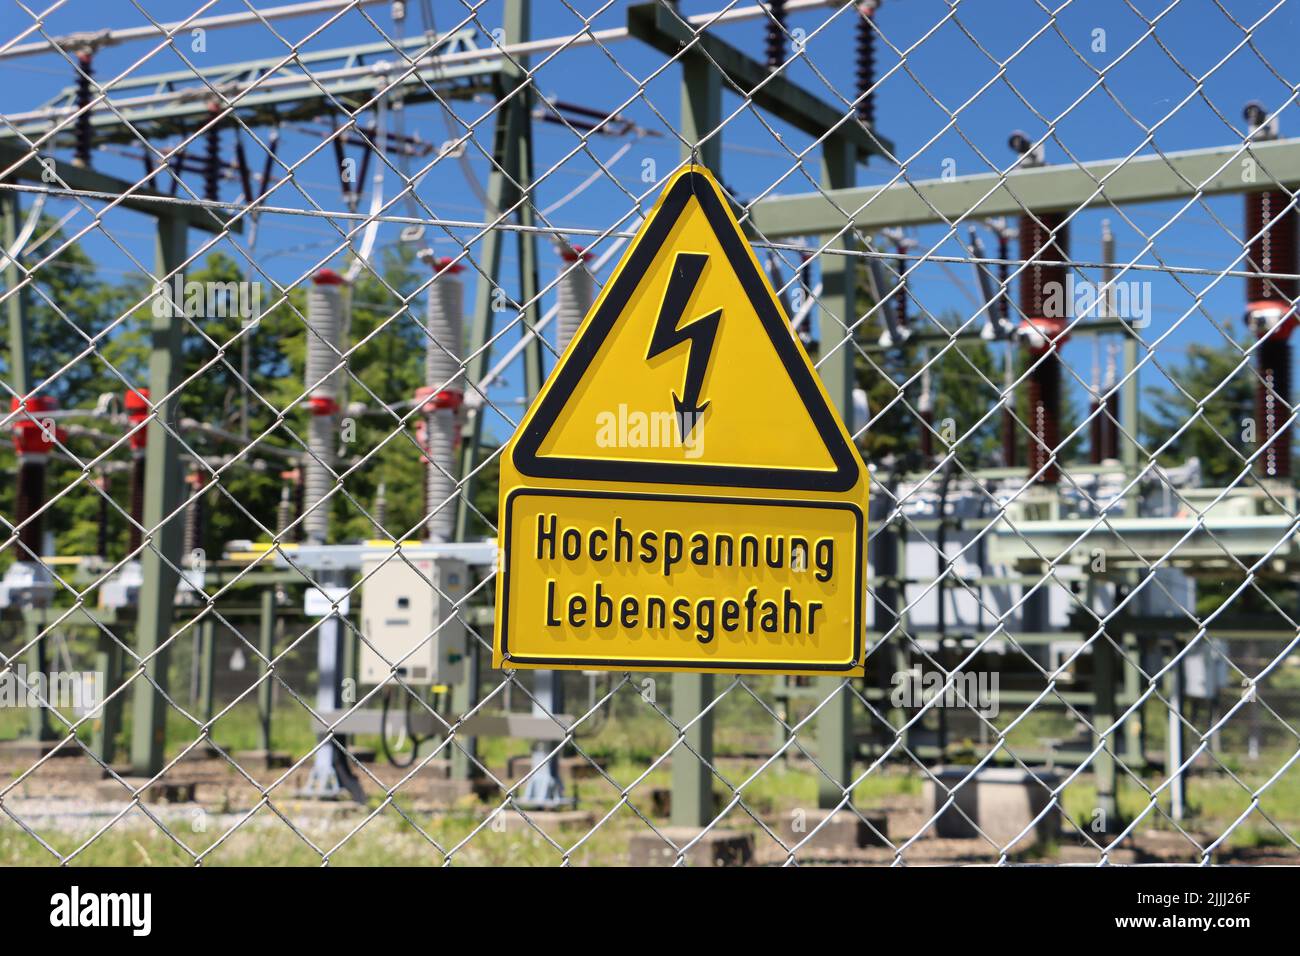 Attention: high voltage, danger for life is translation for german 'Hochspannung Lebensgefahr'. at transformer station during summertime with blue sky Stock Photo